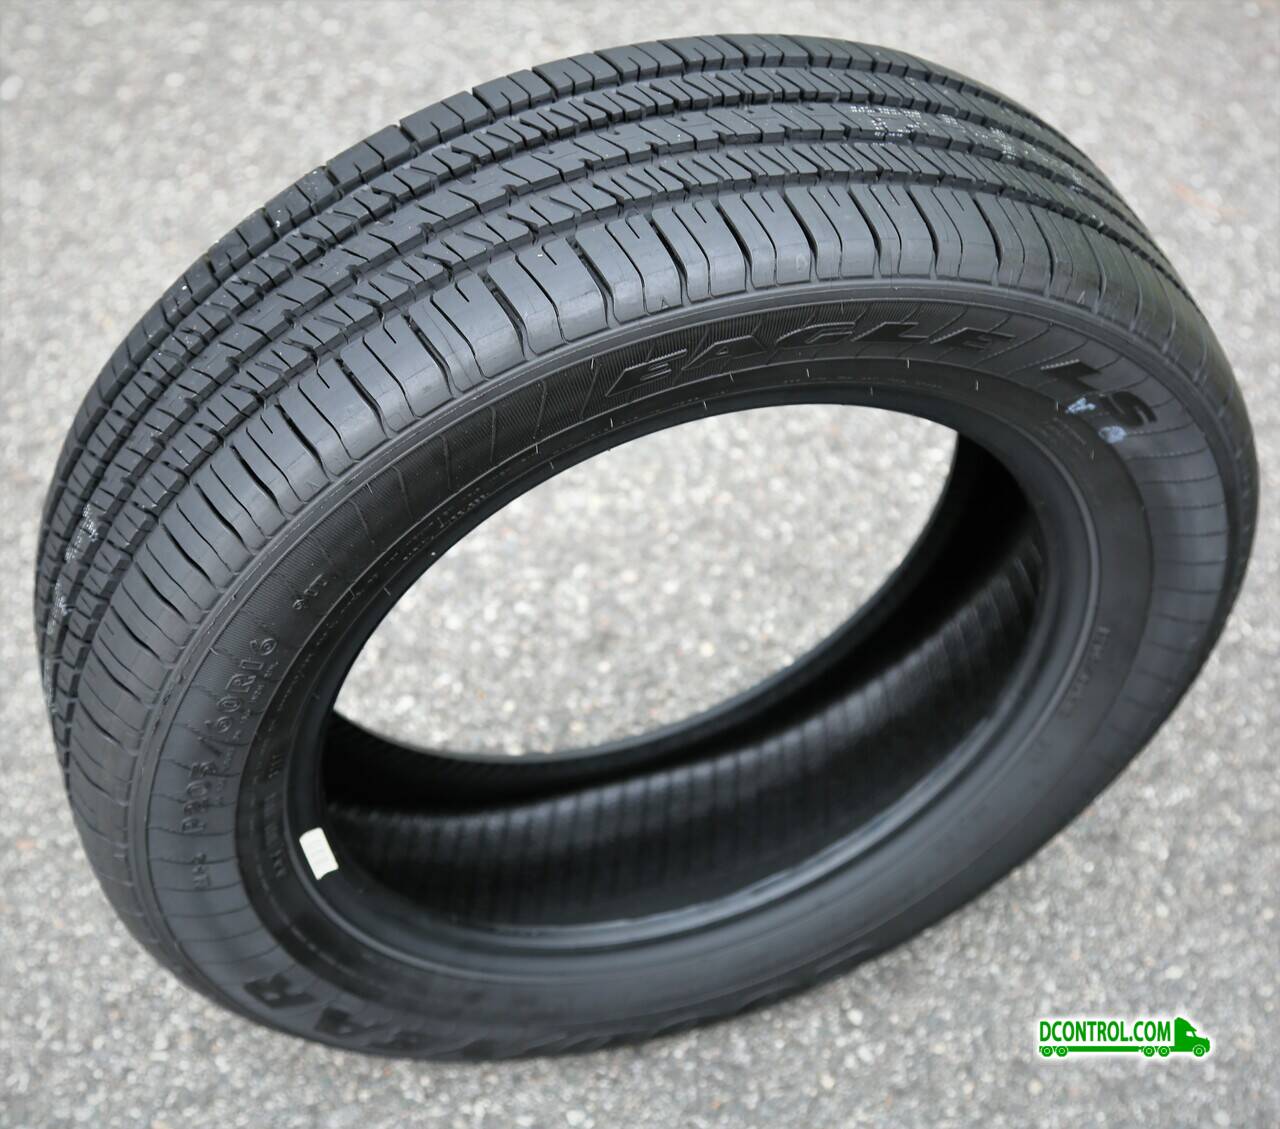 Goodyear Eagle LS 205/60R16 SL Touring Tire